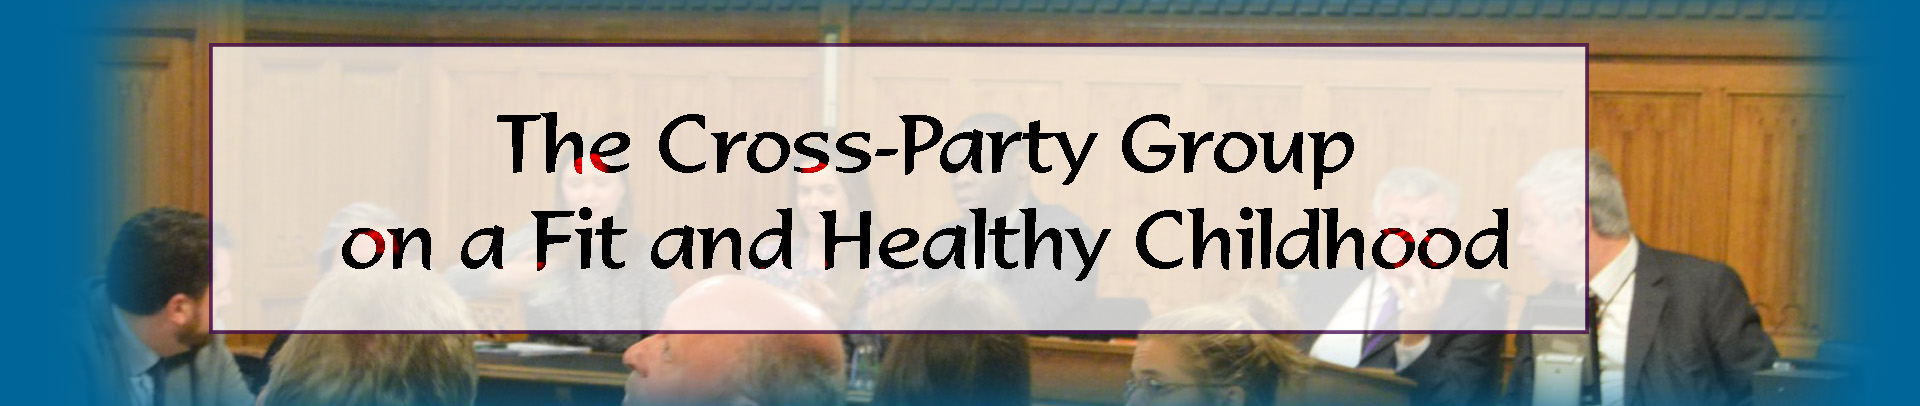 The Cross-Party Group on a Fit and Healthy Childhood